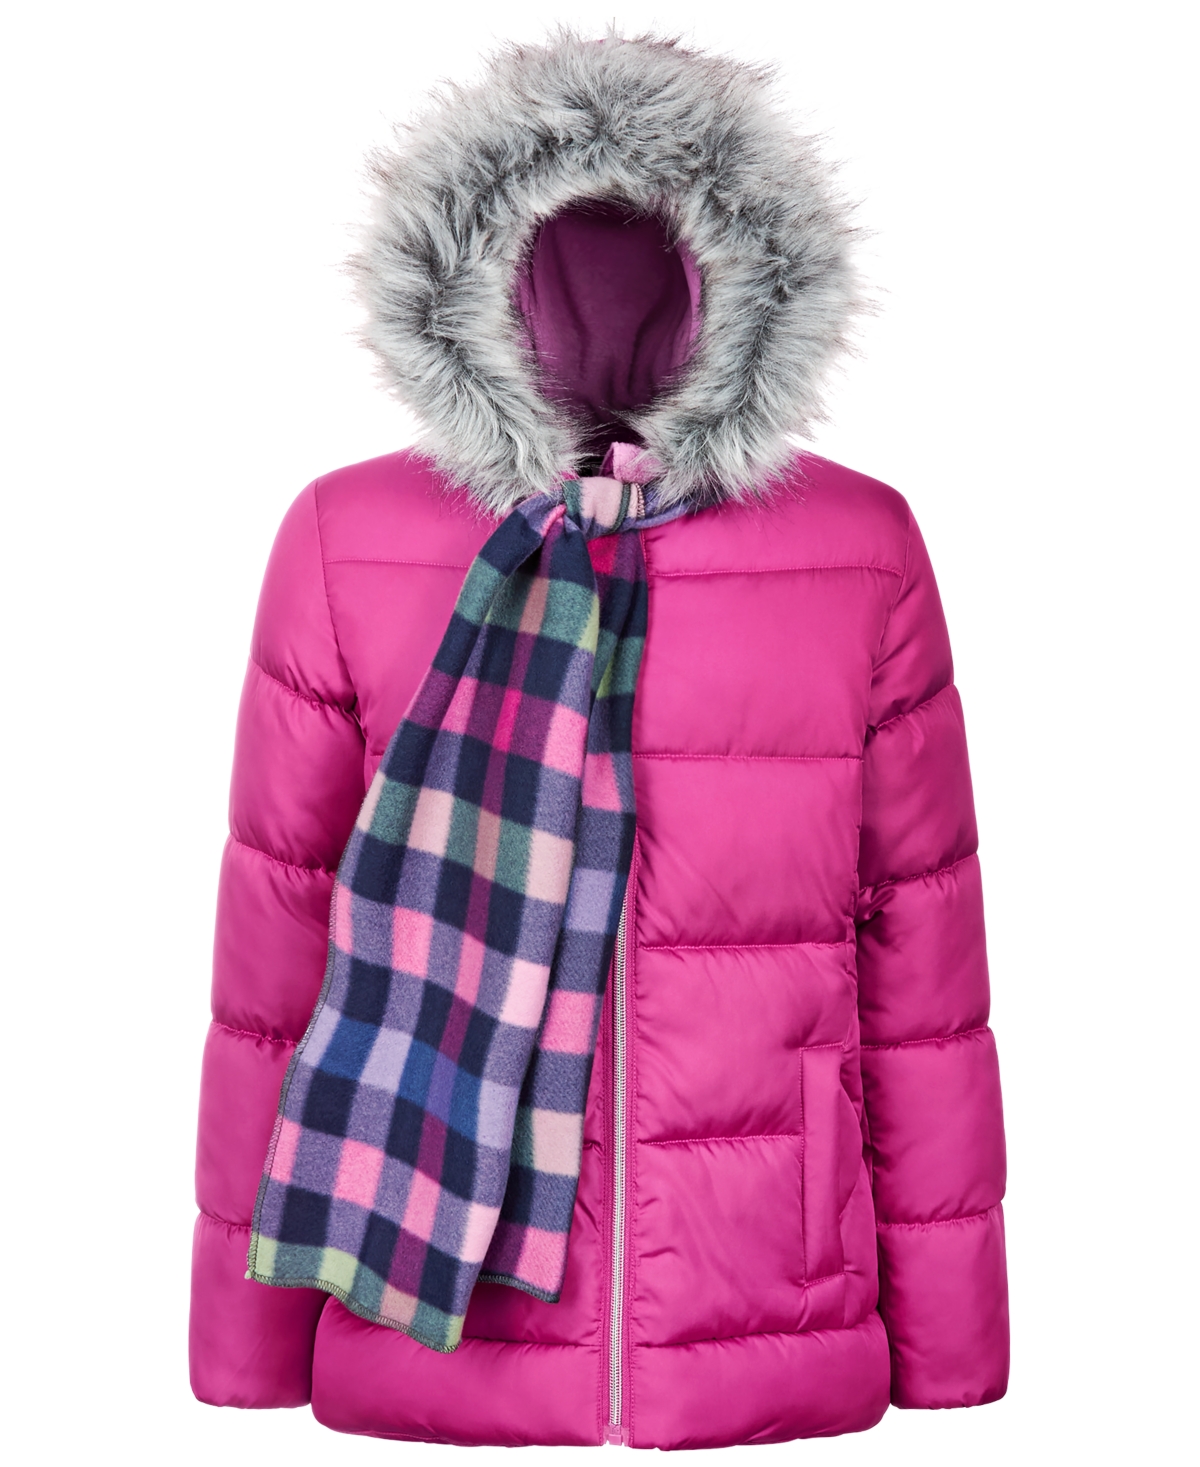 S Rothschild & Co Big Girls Solid Quilt Puffer Coat & Plaid Scarf In Charcoal